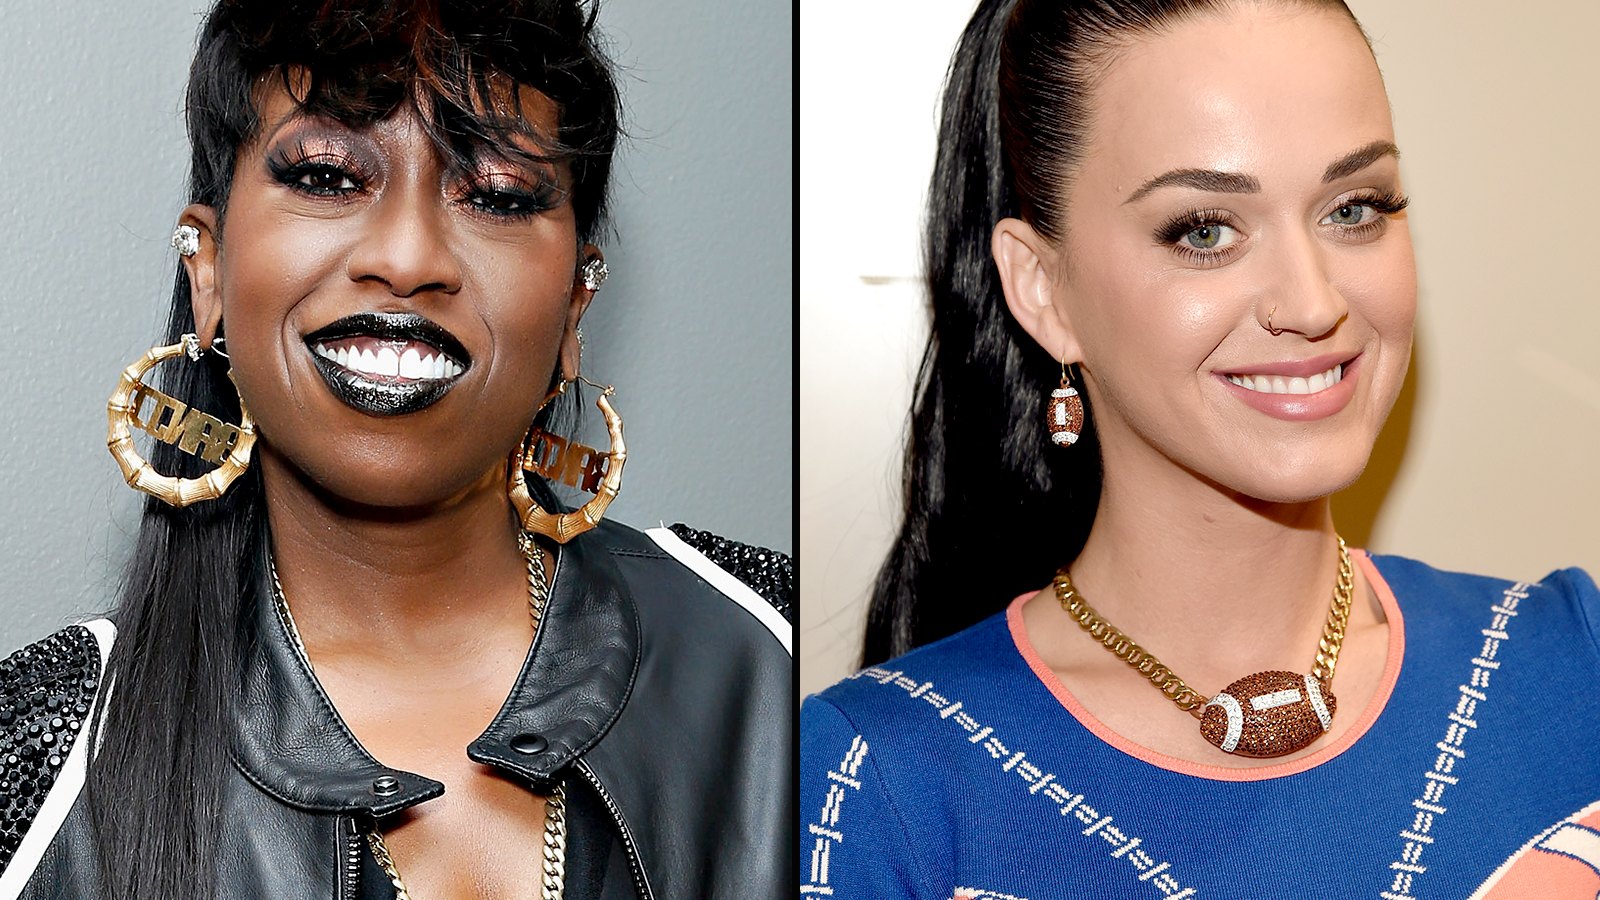 Missy joining Katy for the Super Bowl halftime show